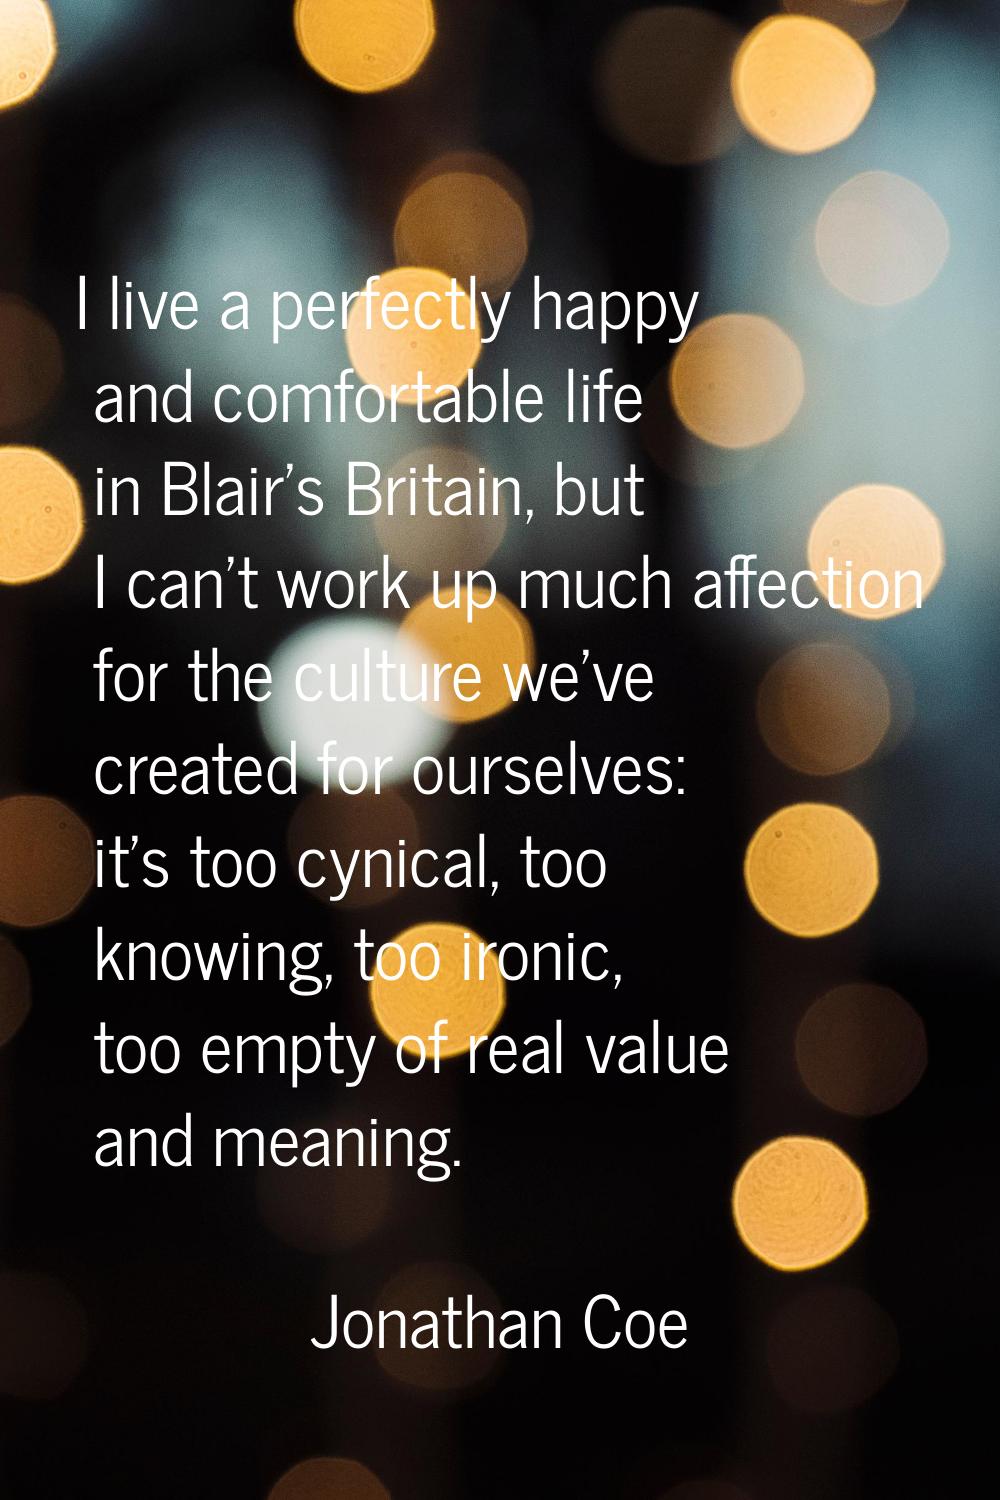 I live a perfectly happy and comfortable life in Blair's Britain, but I can't work up much affectio